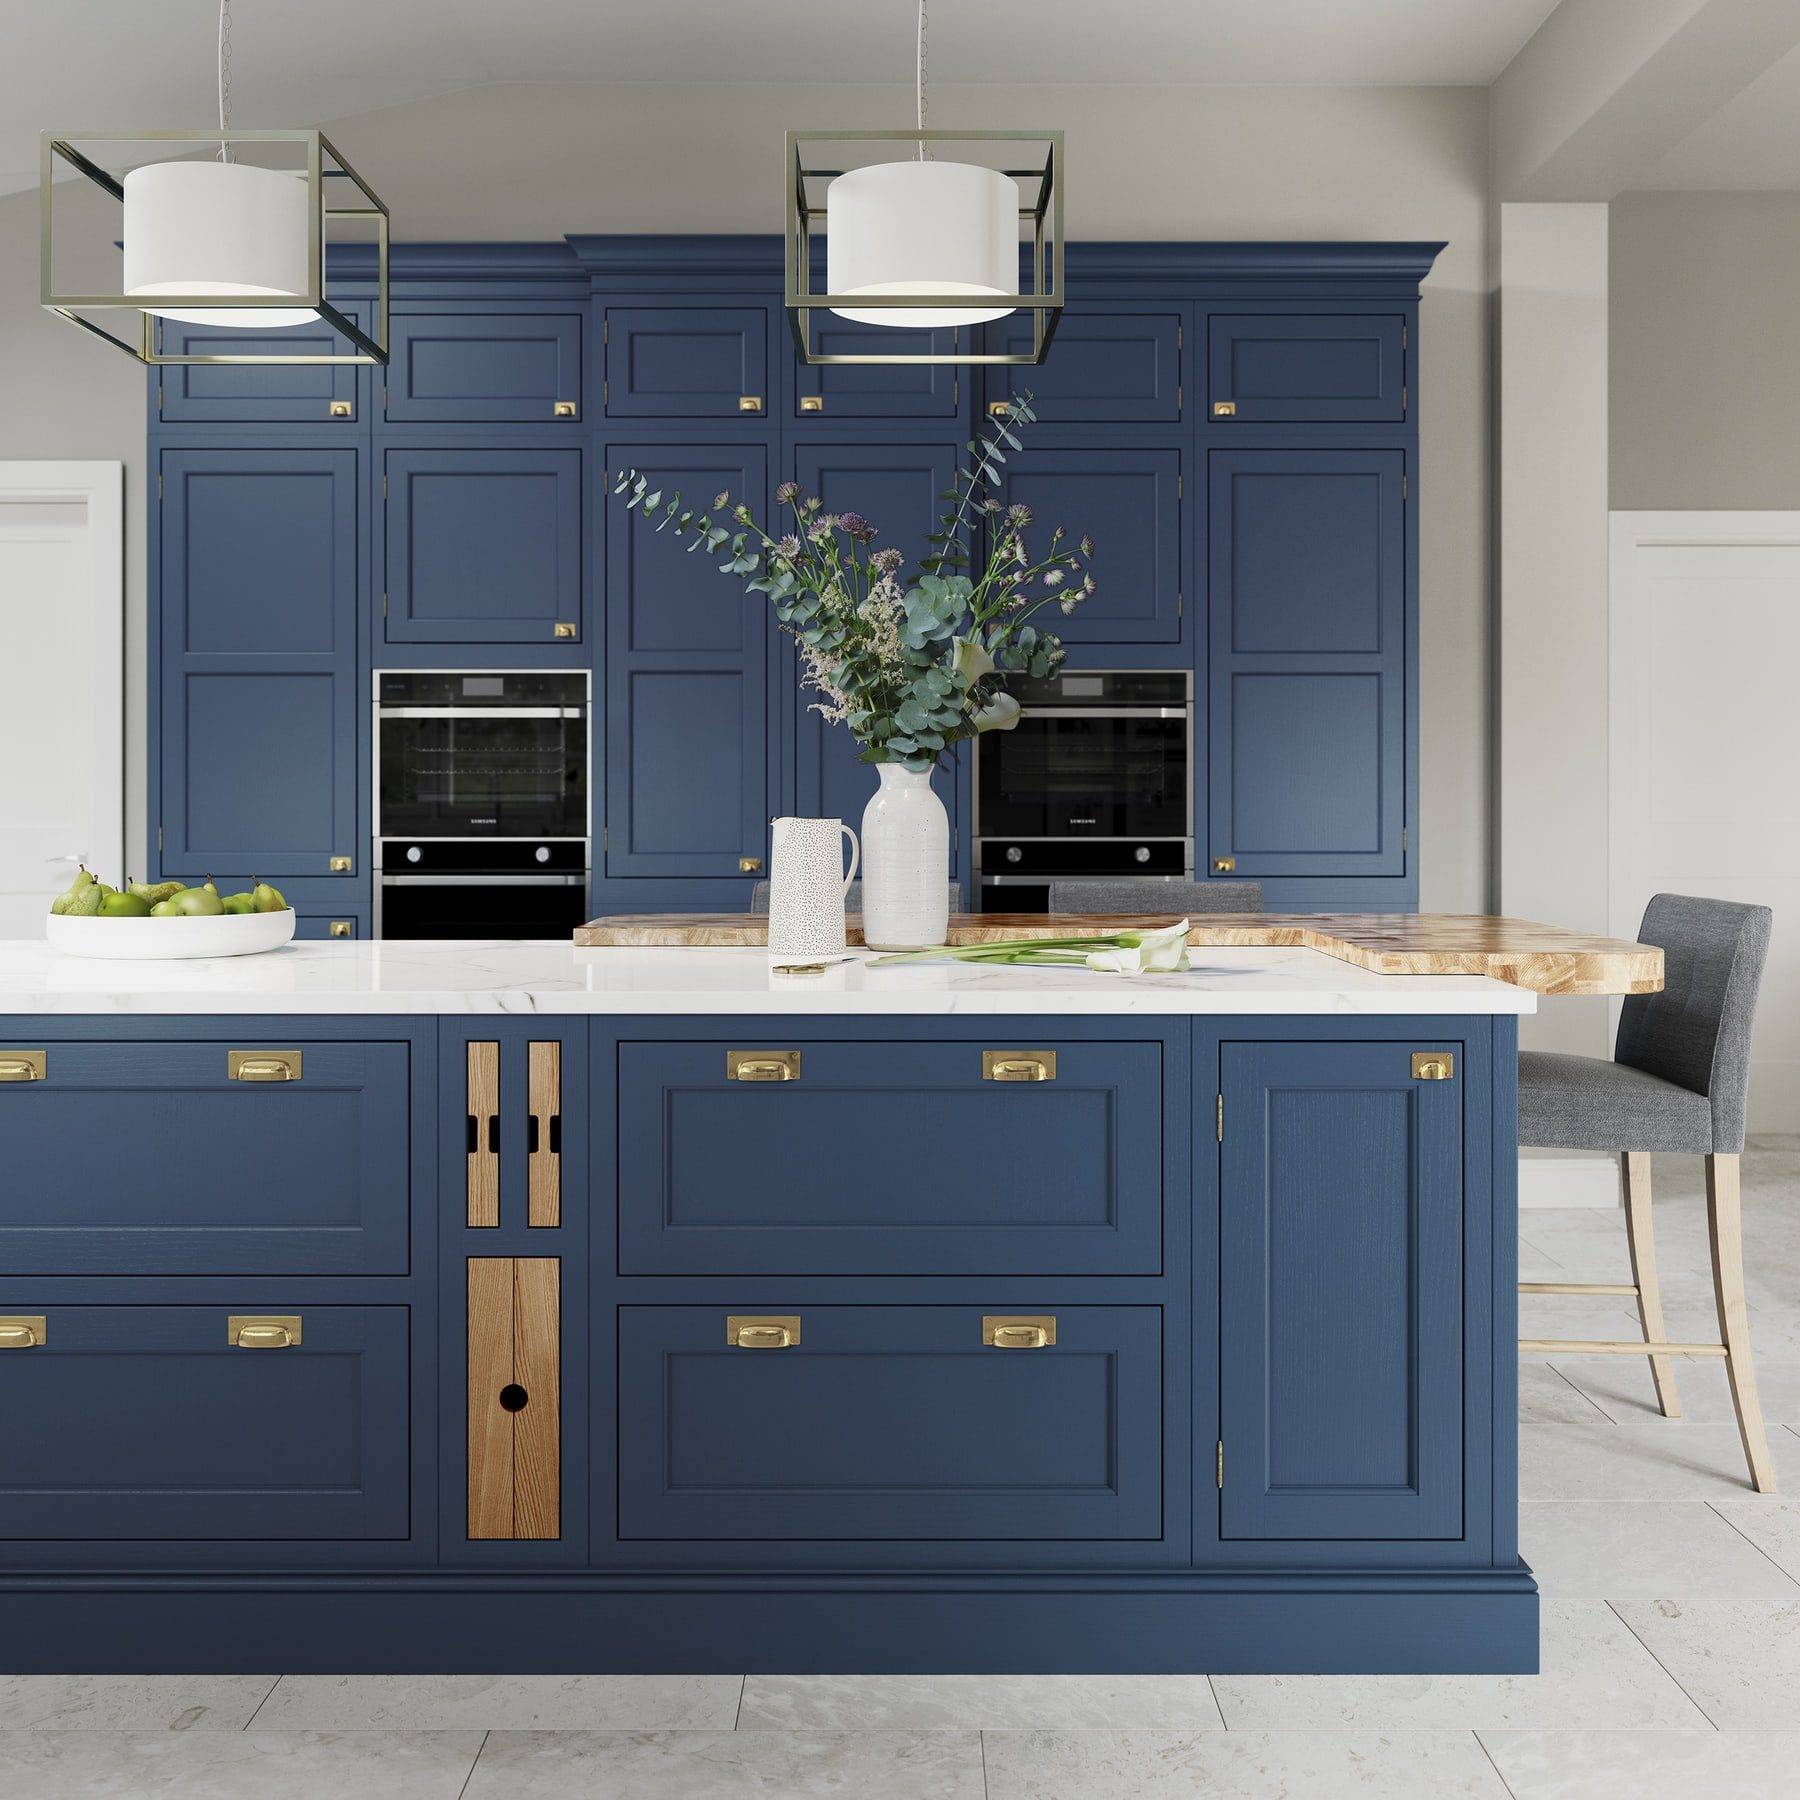 Belgravia Parisian Blue And Stone In Frame Kitchen With Island | Colourhill, Mansfield